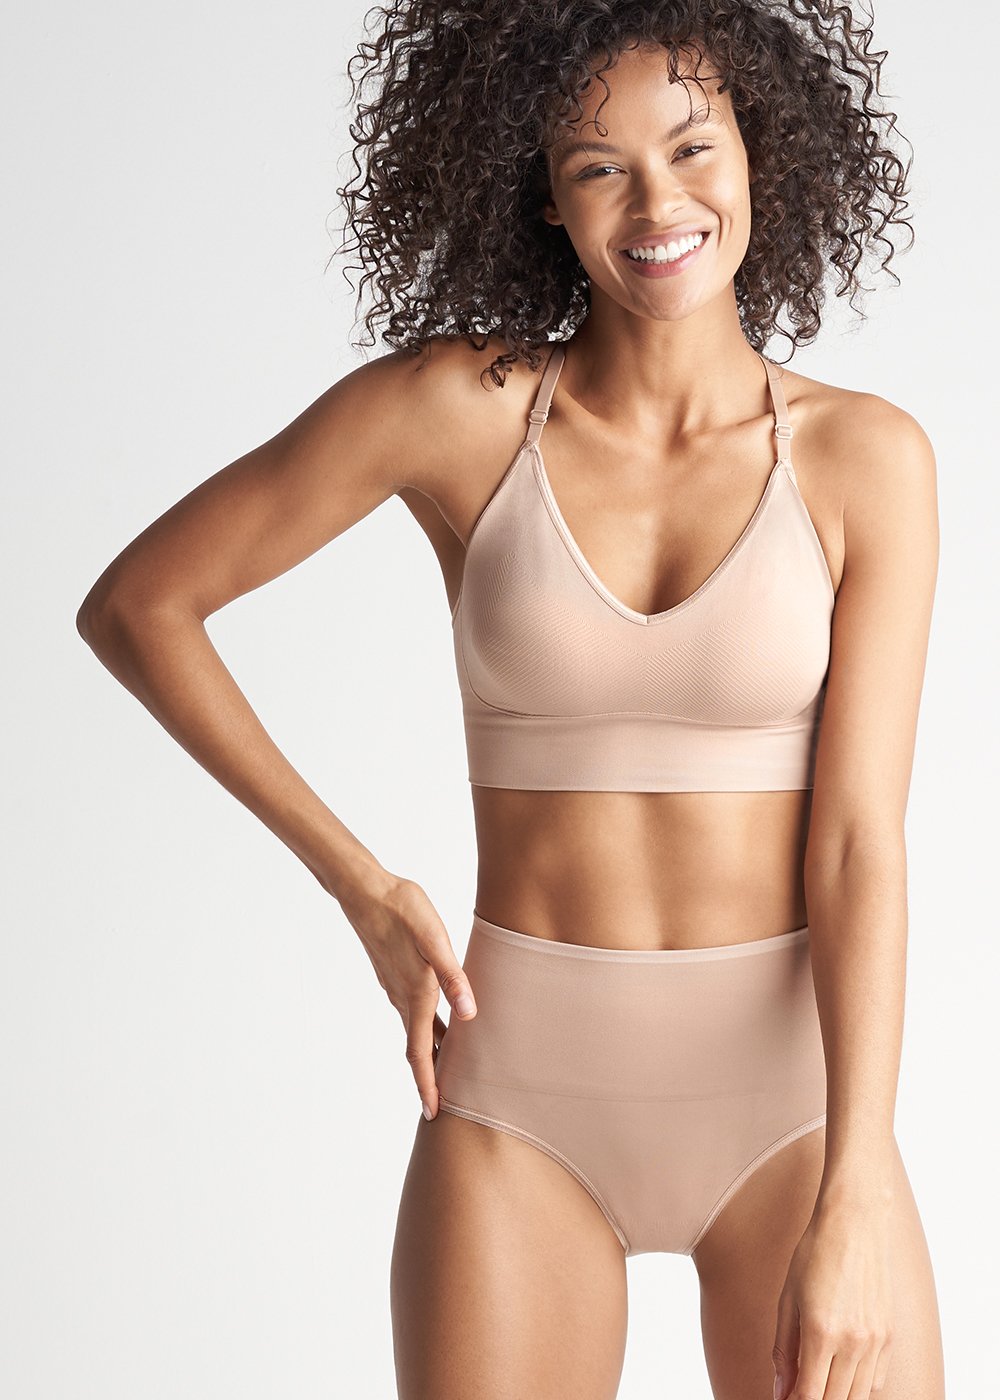 This Weekend Only, All Bras And Bralettes Are Just $19 At Yummie - SHEfinds